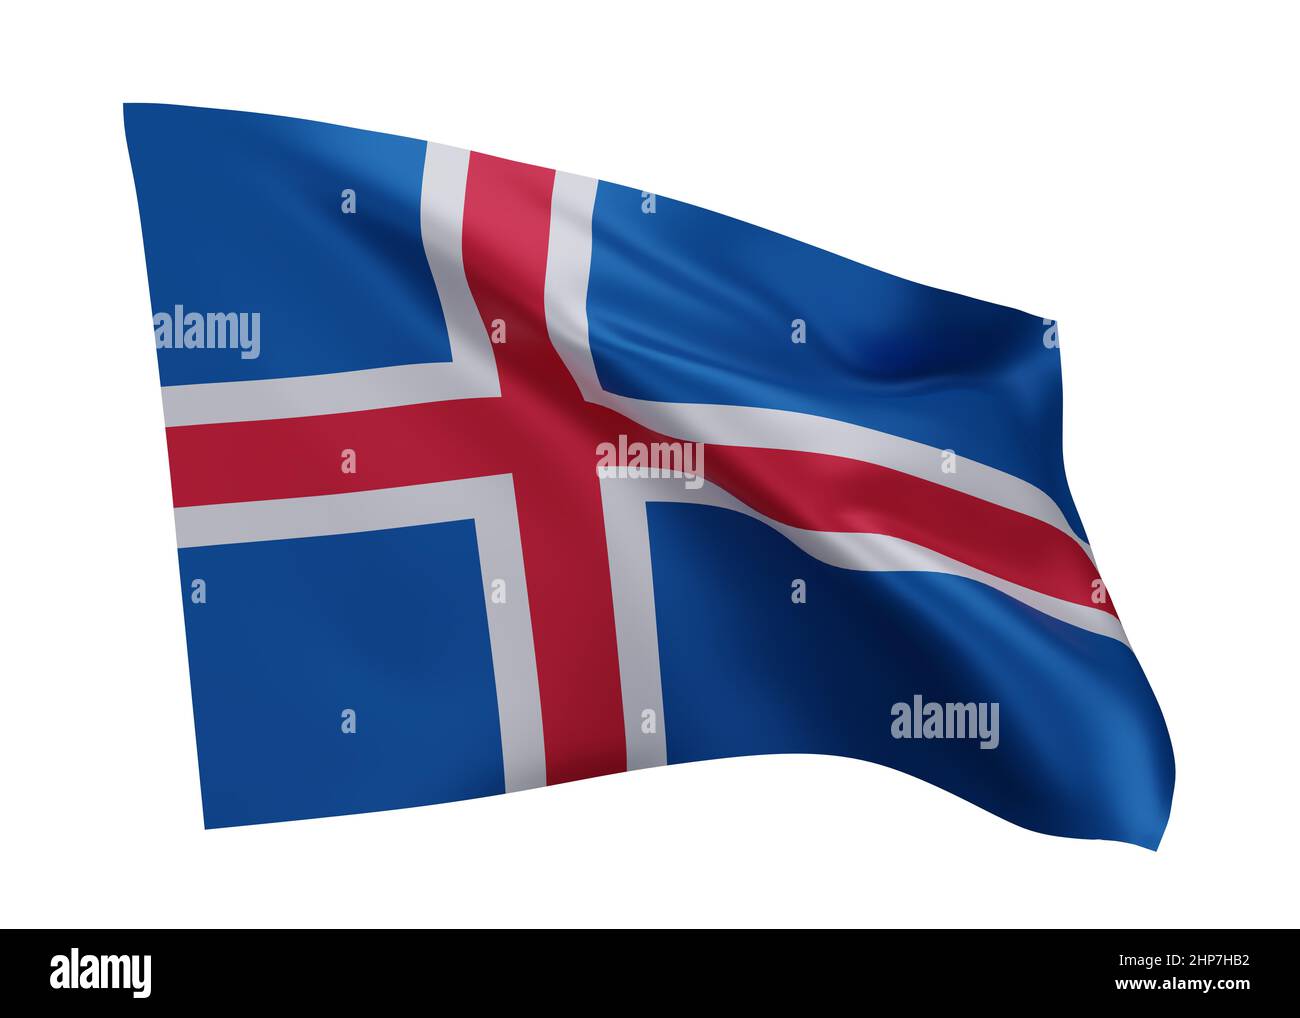 3d illustration flag of Iceland. Republic of Iceland high resolution flag isolated against white background. 3d rendering Stock Photo